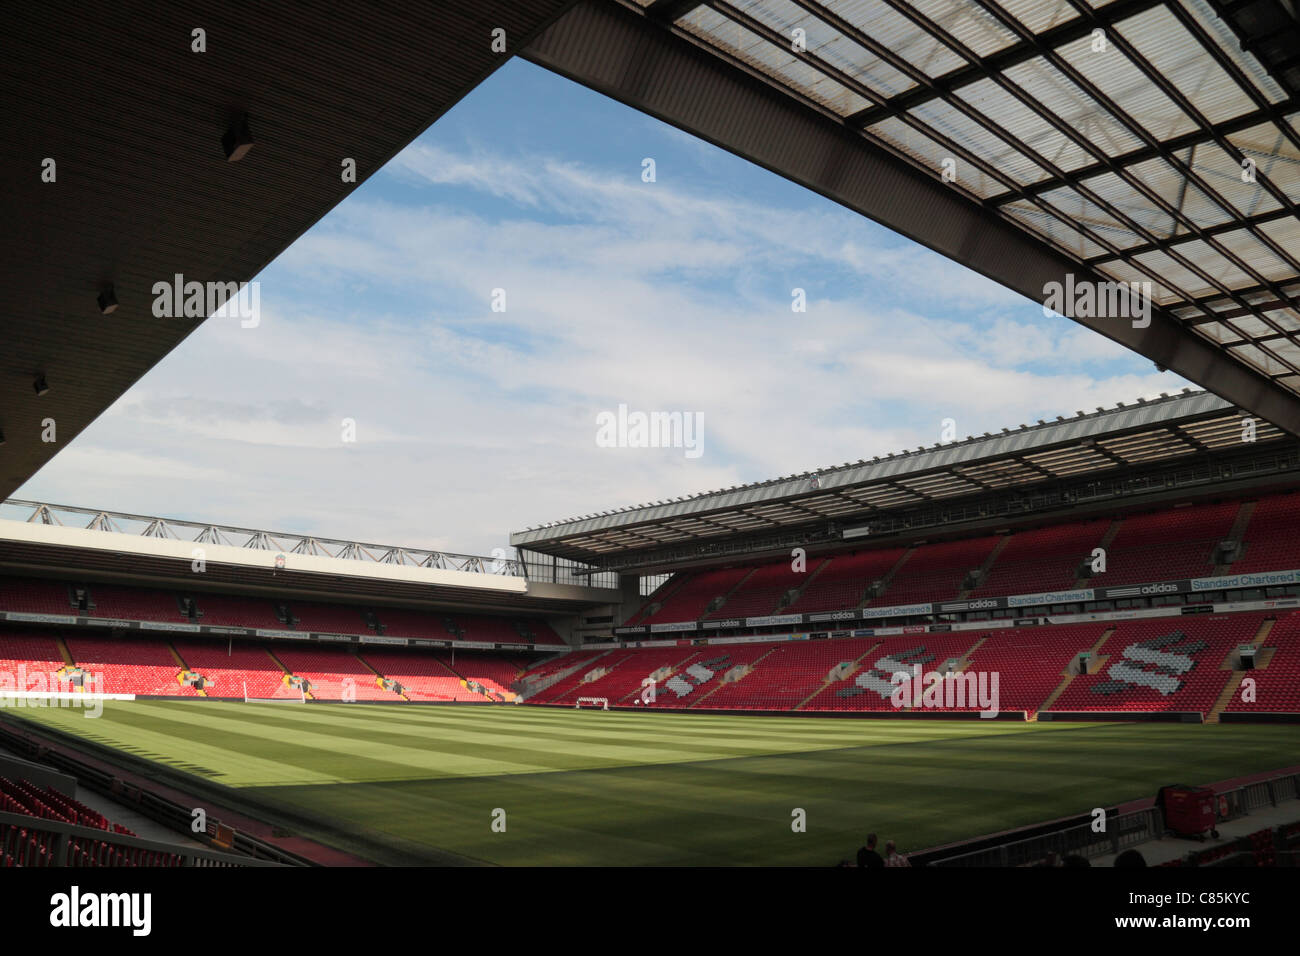 General view of Anfield from the Kop end (2011), towards the Anfield Road & Centenary stands of Liverpool Football club.  Aug 2011 Stock Photo